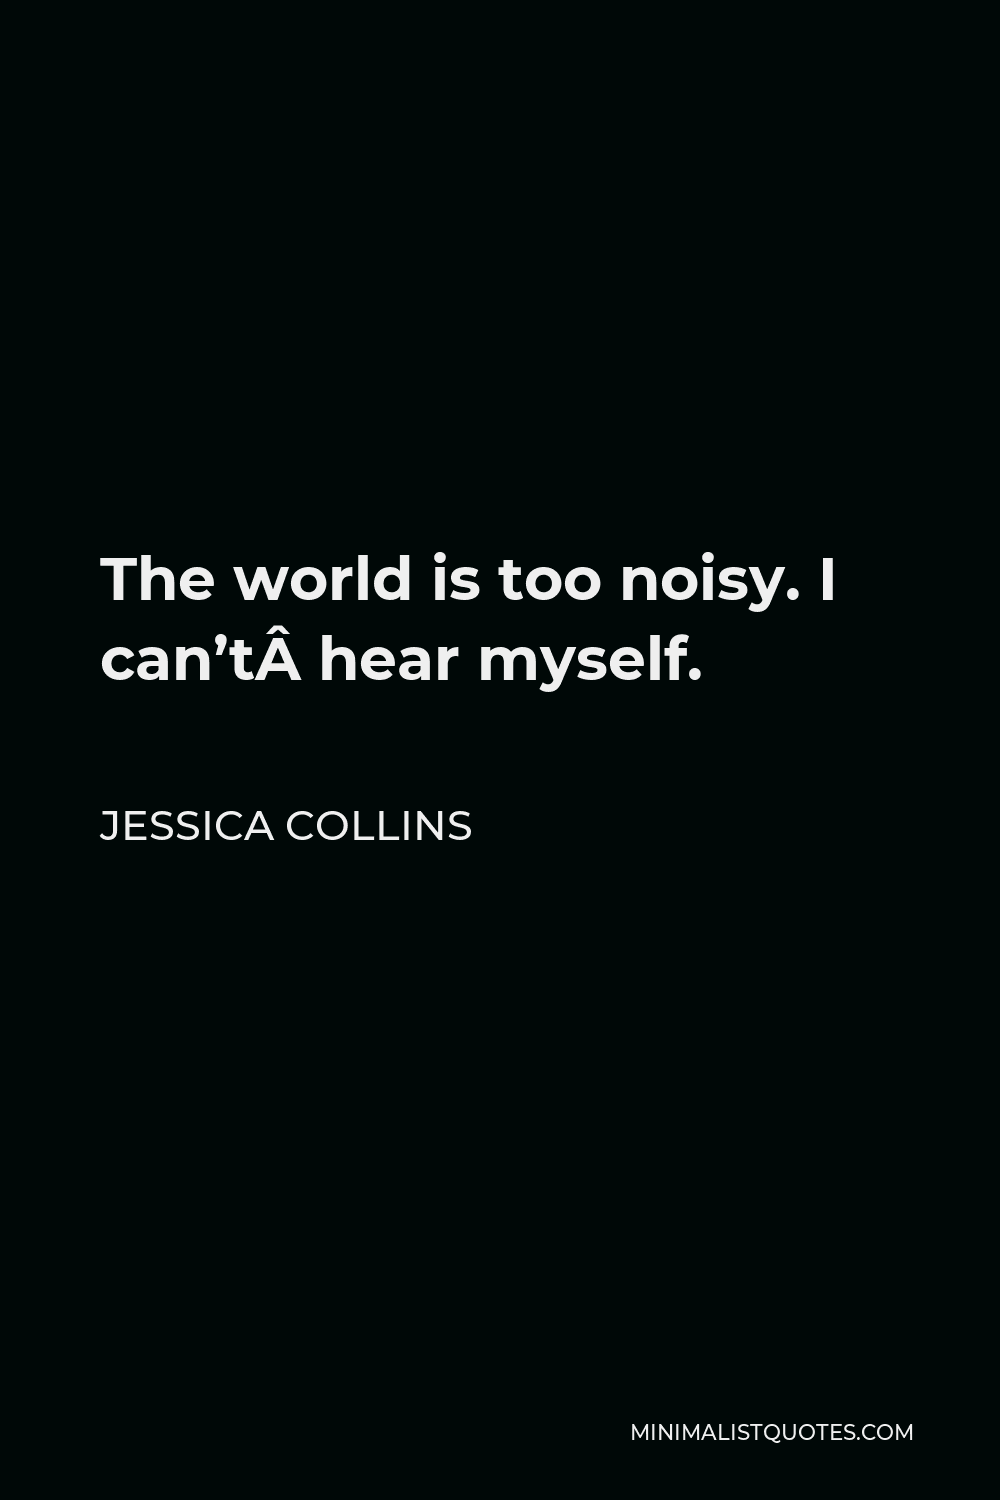 Jessica Collins Quote - The world is too noisy. I can’t hear myself.